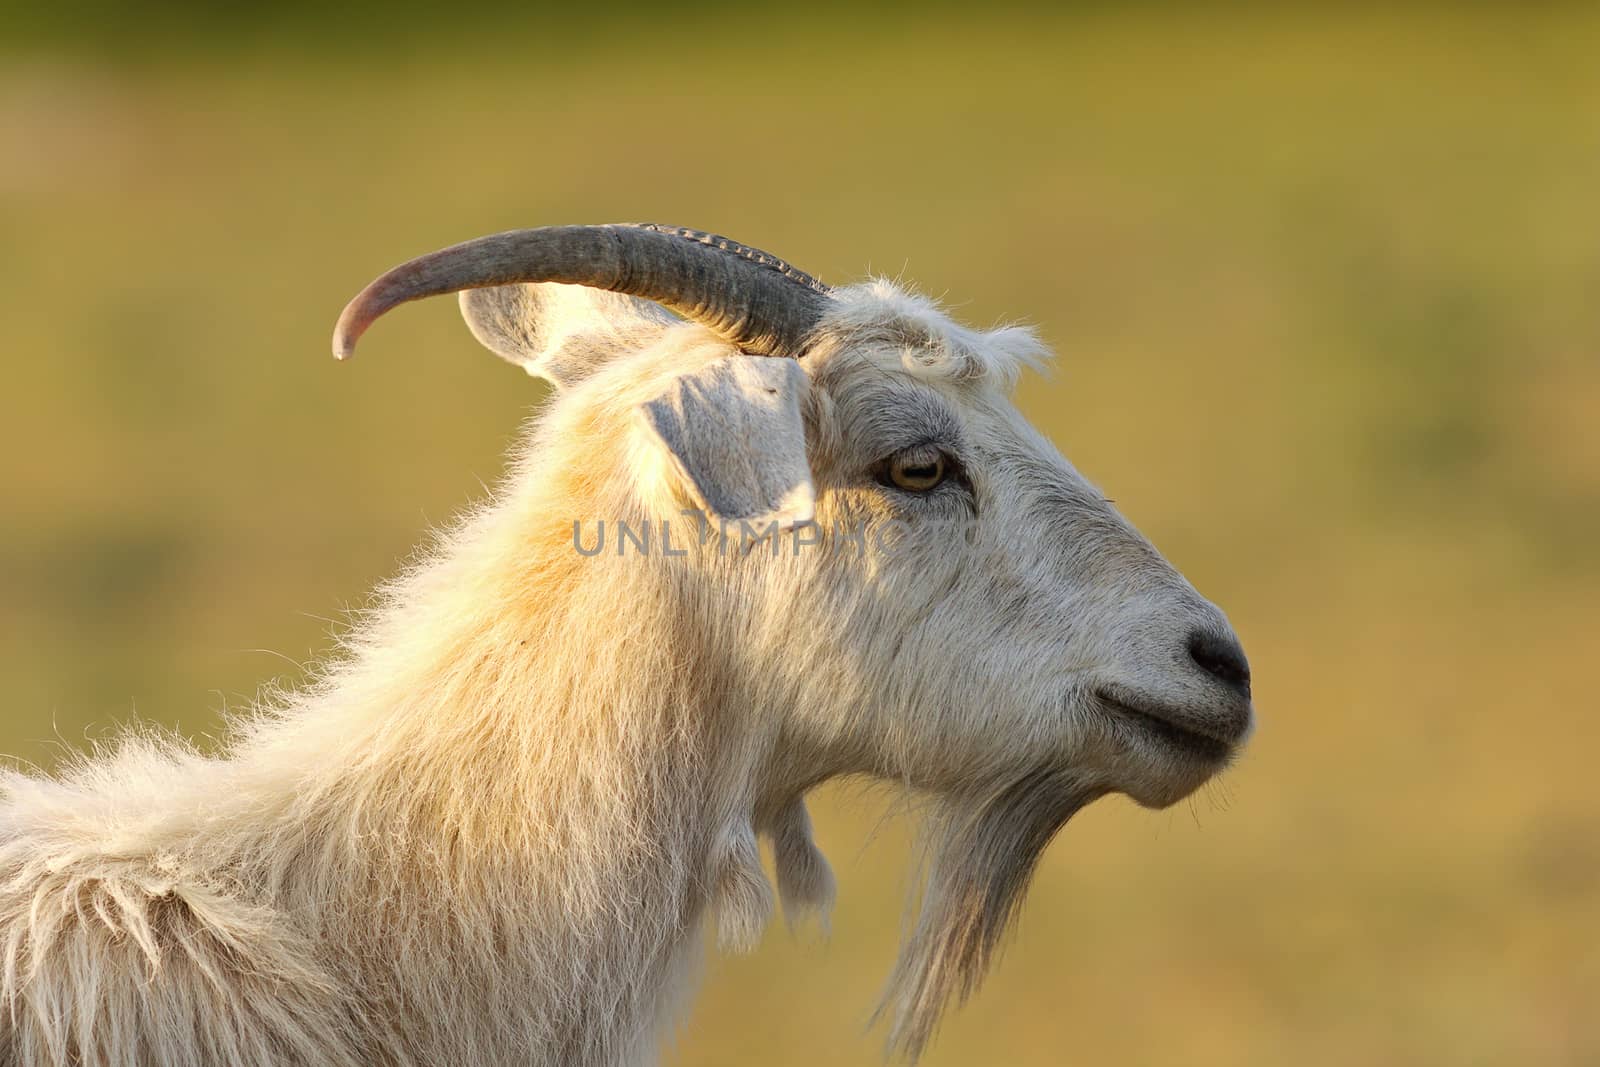 bearded white goat over green out of focus background